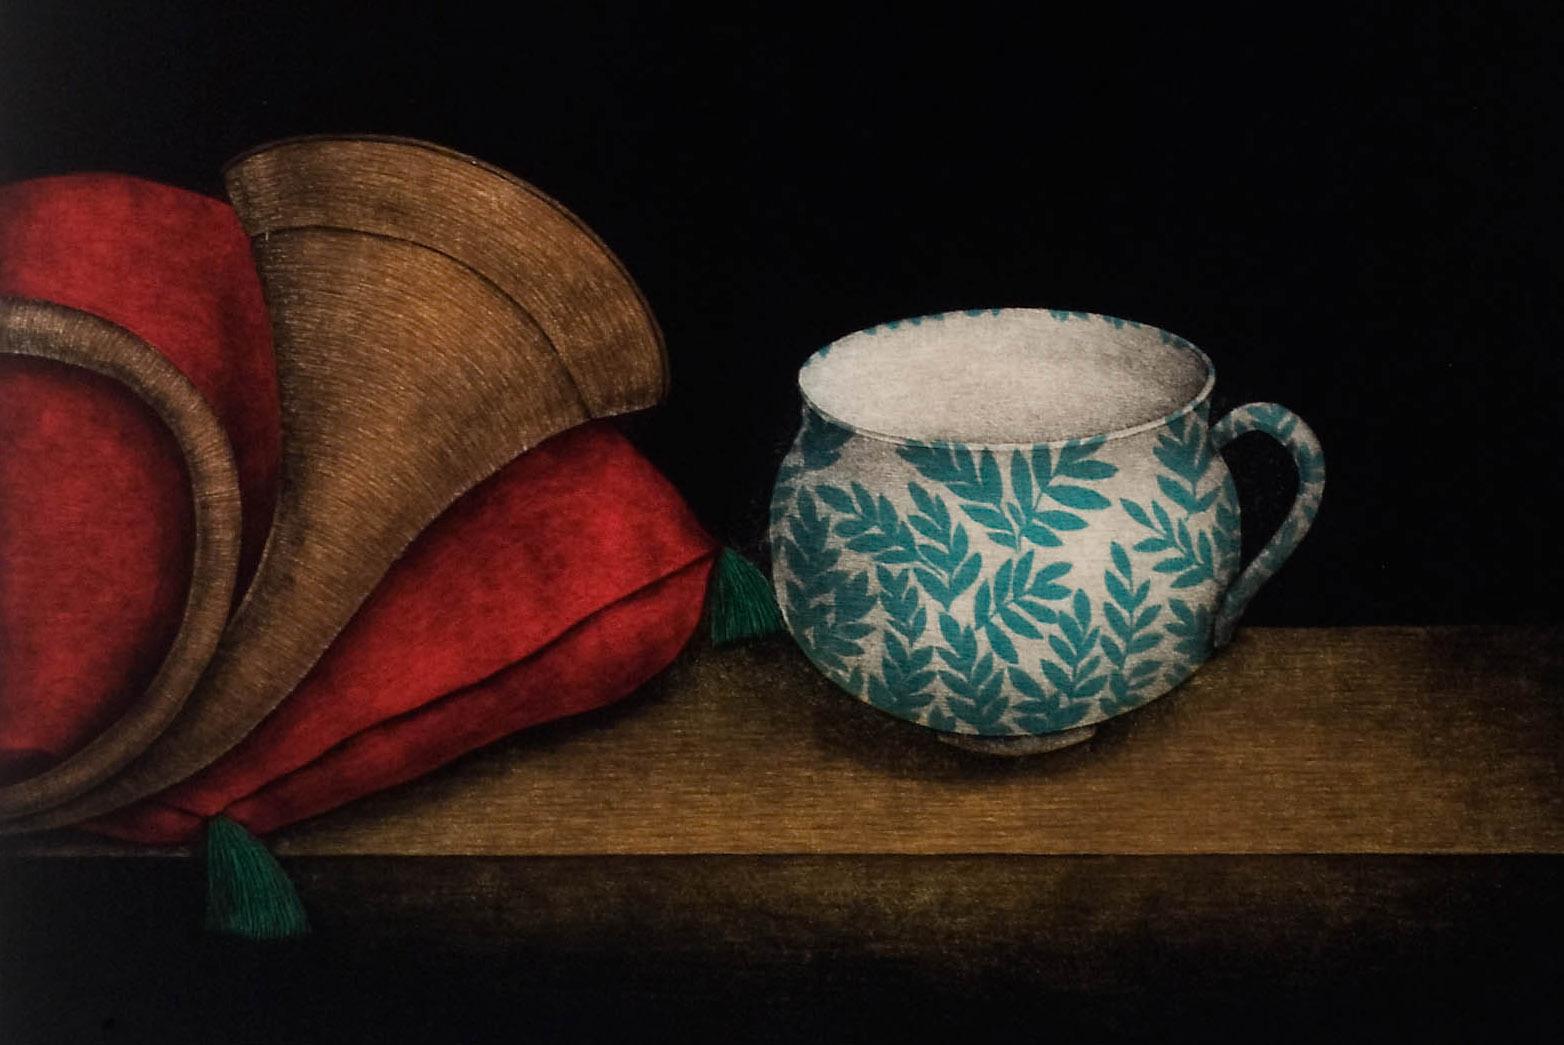 untitled (Still Life with Cup and Horn)
Color mezzotint, c. 1980
Numbered and signed in pencil by the artist (see photos)
Edition: 100 (53/100)
Published by John Szoke Graphics, New York (blindstamp lower right)
Condition: excellent
Plate/Image